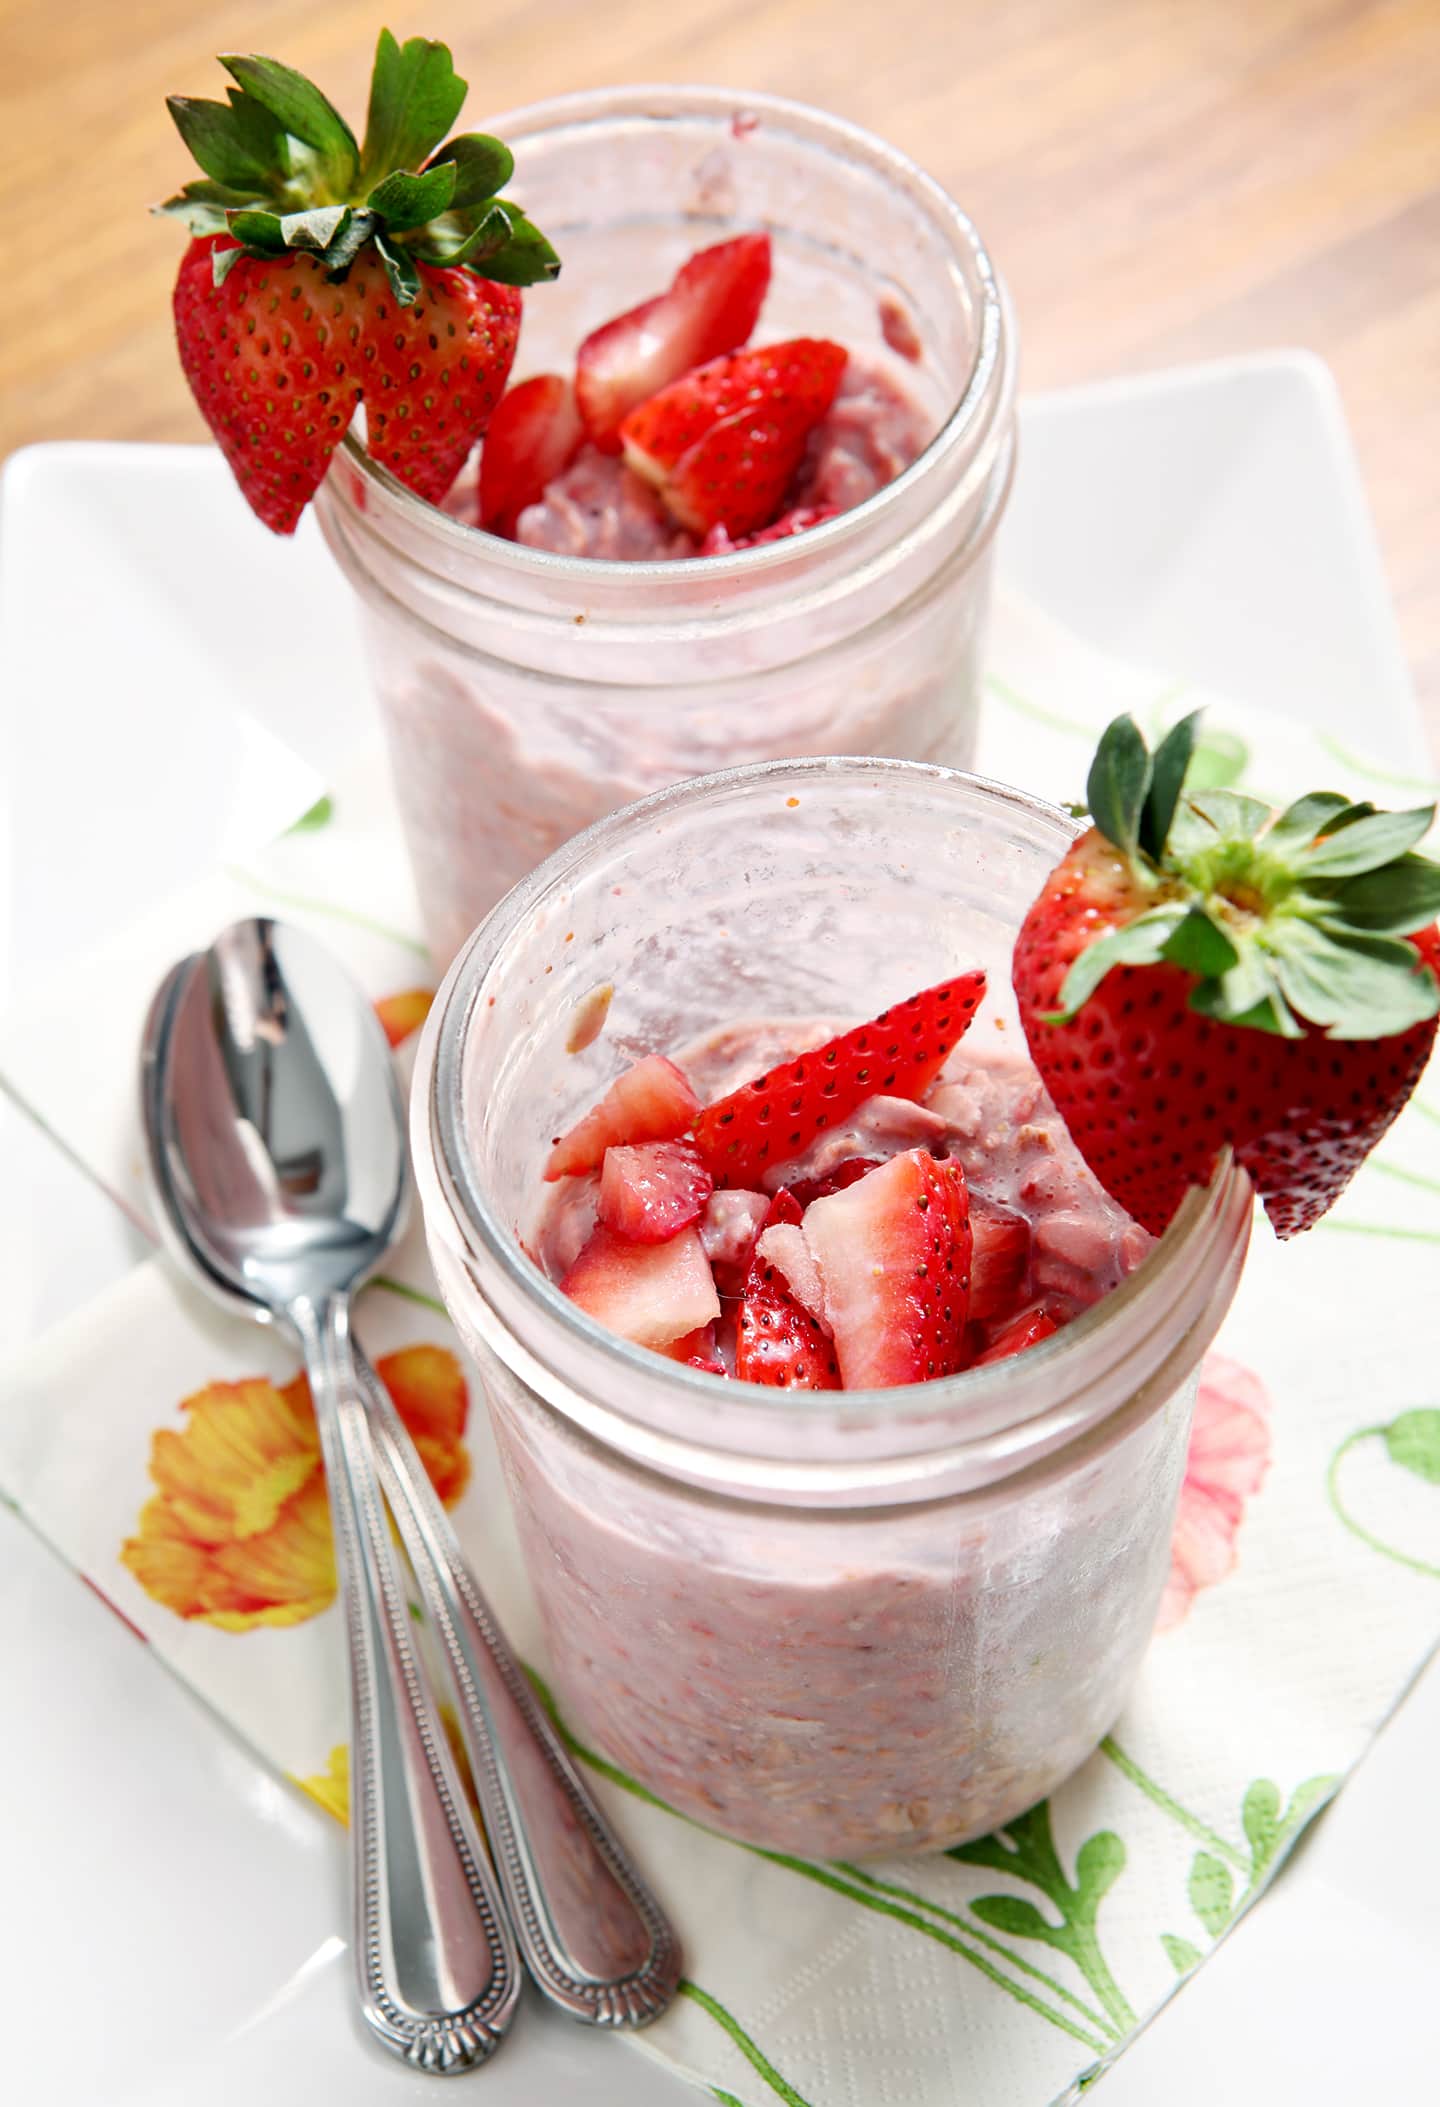 Strawberry Overnight Oats for a quick and delicious breakfast!